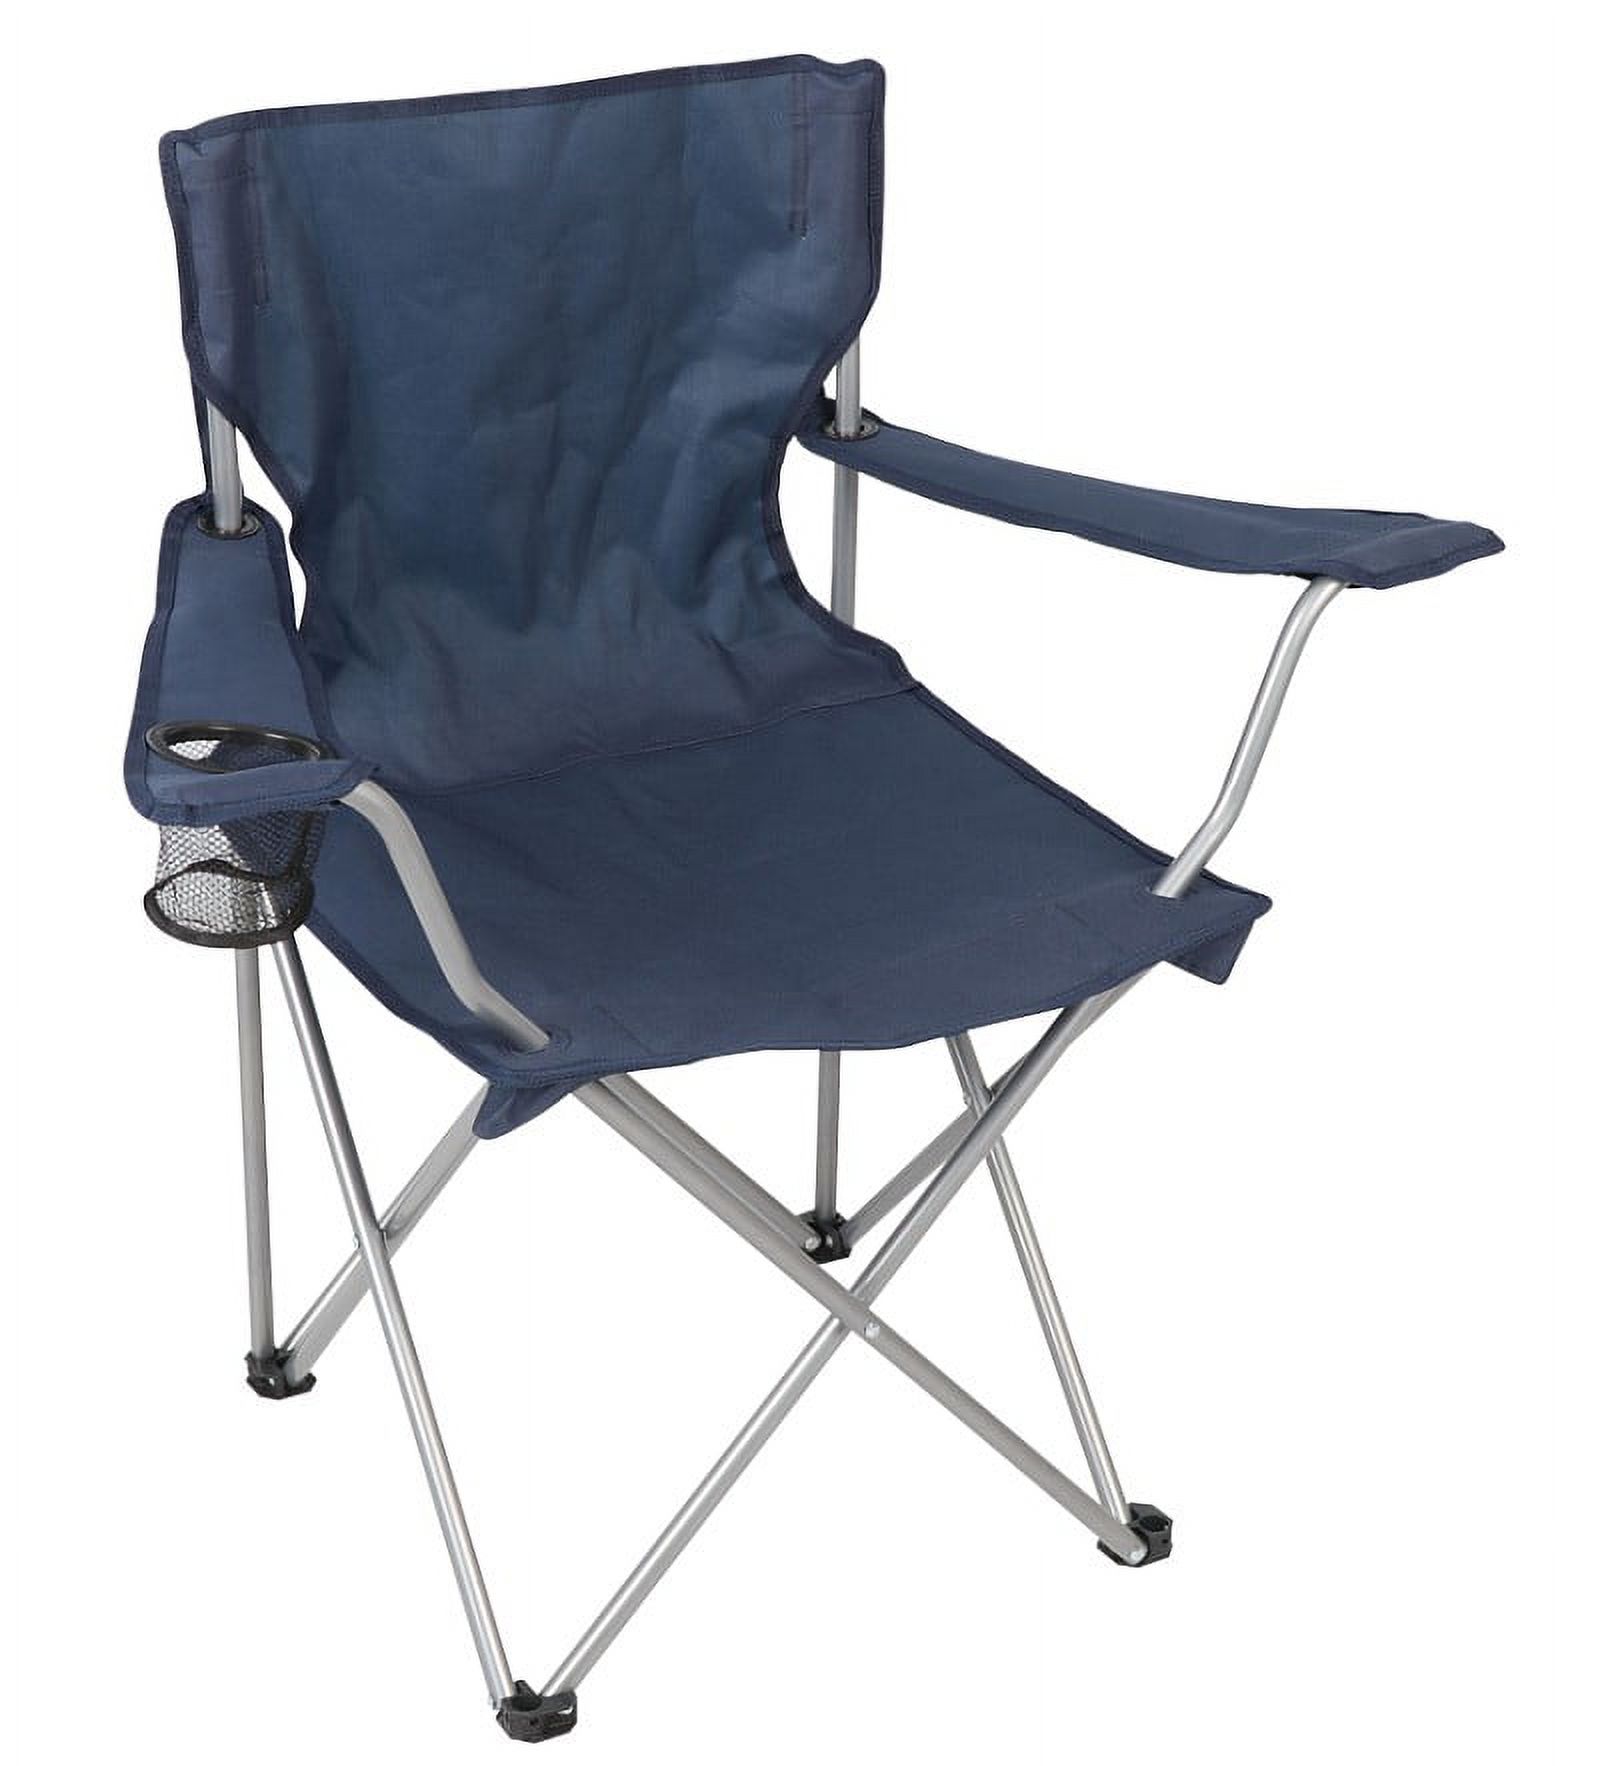 Ozark Trail Basic Quad Folding Camp Chair With Cup Holder, Blue, Adult - image 3 of 14